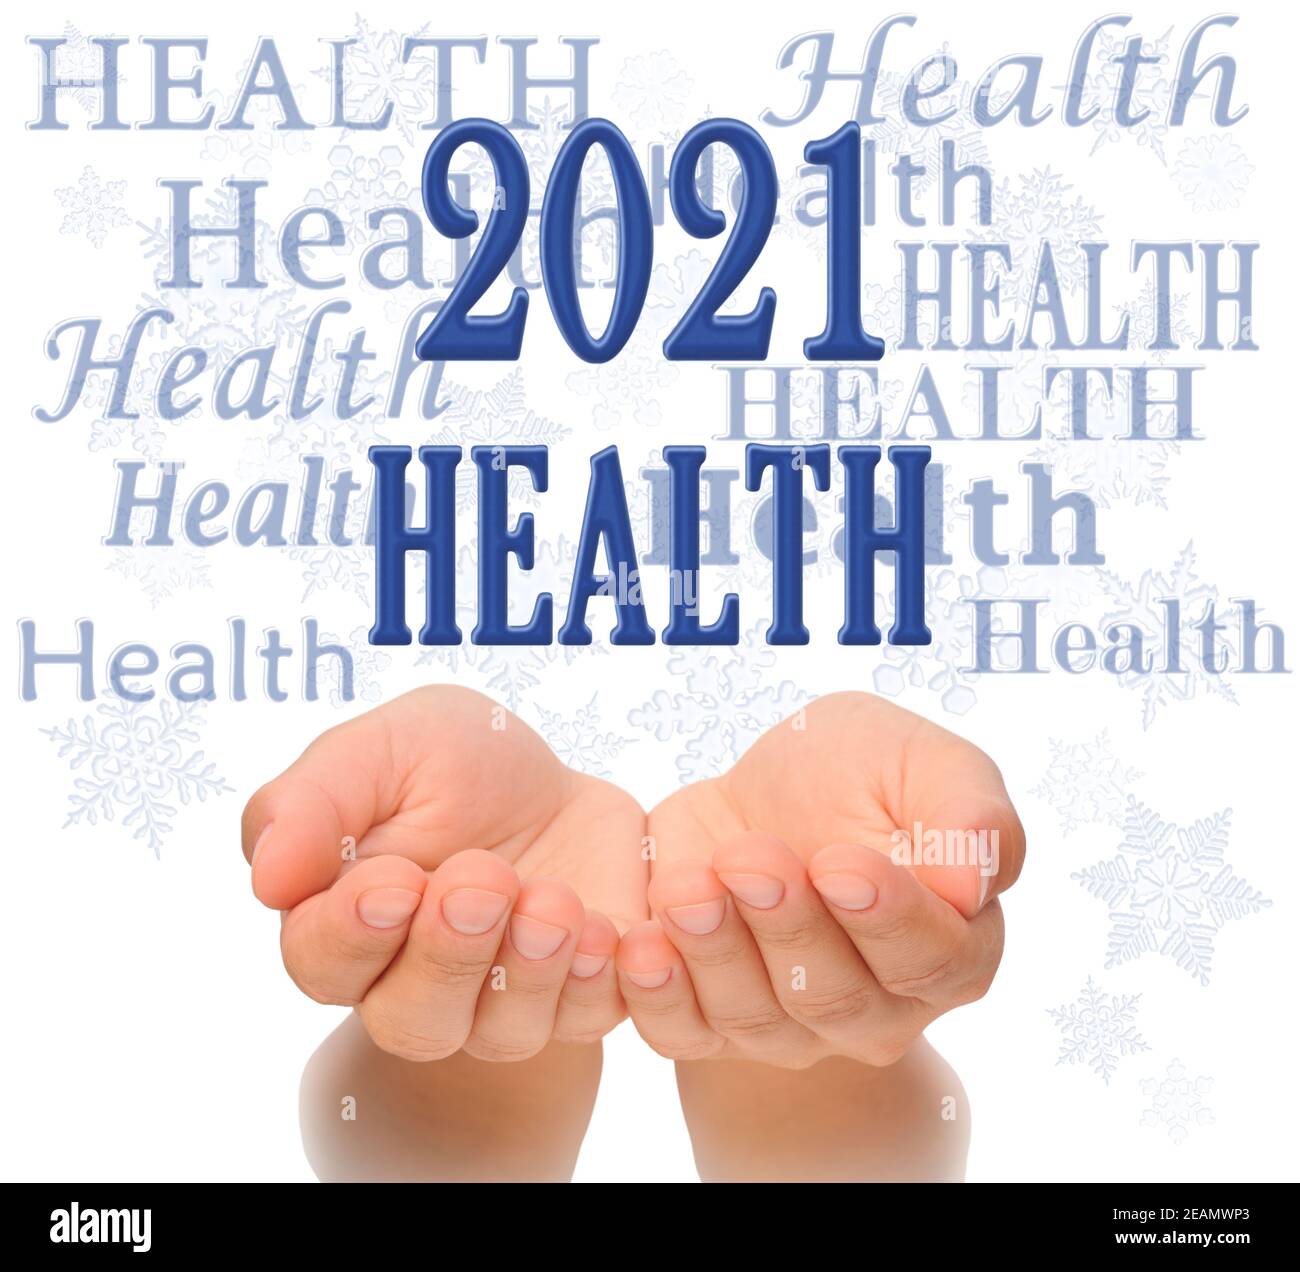 Health Happy new year greeting card 2021, health concept, text Health, greeting card 2021, woman's open palms of two hands with word HEALTH  and 2021 number above, surrounded by Health words and snowflakes, Happy New year 2021, 2021 New Year greeting card Stock Photo